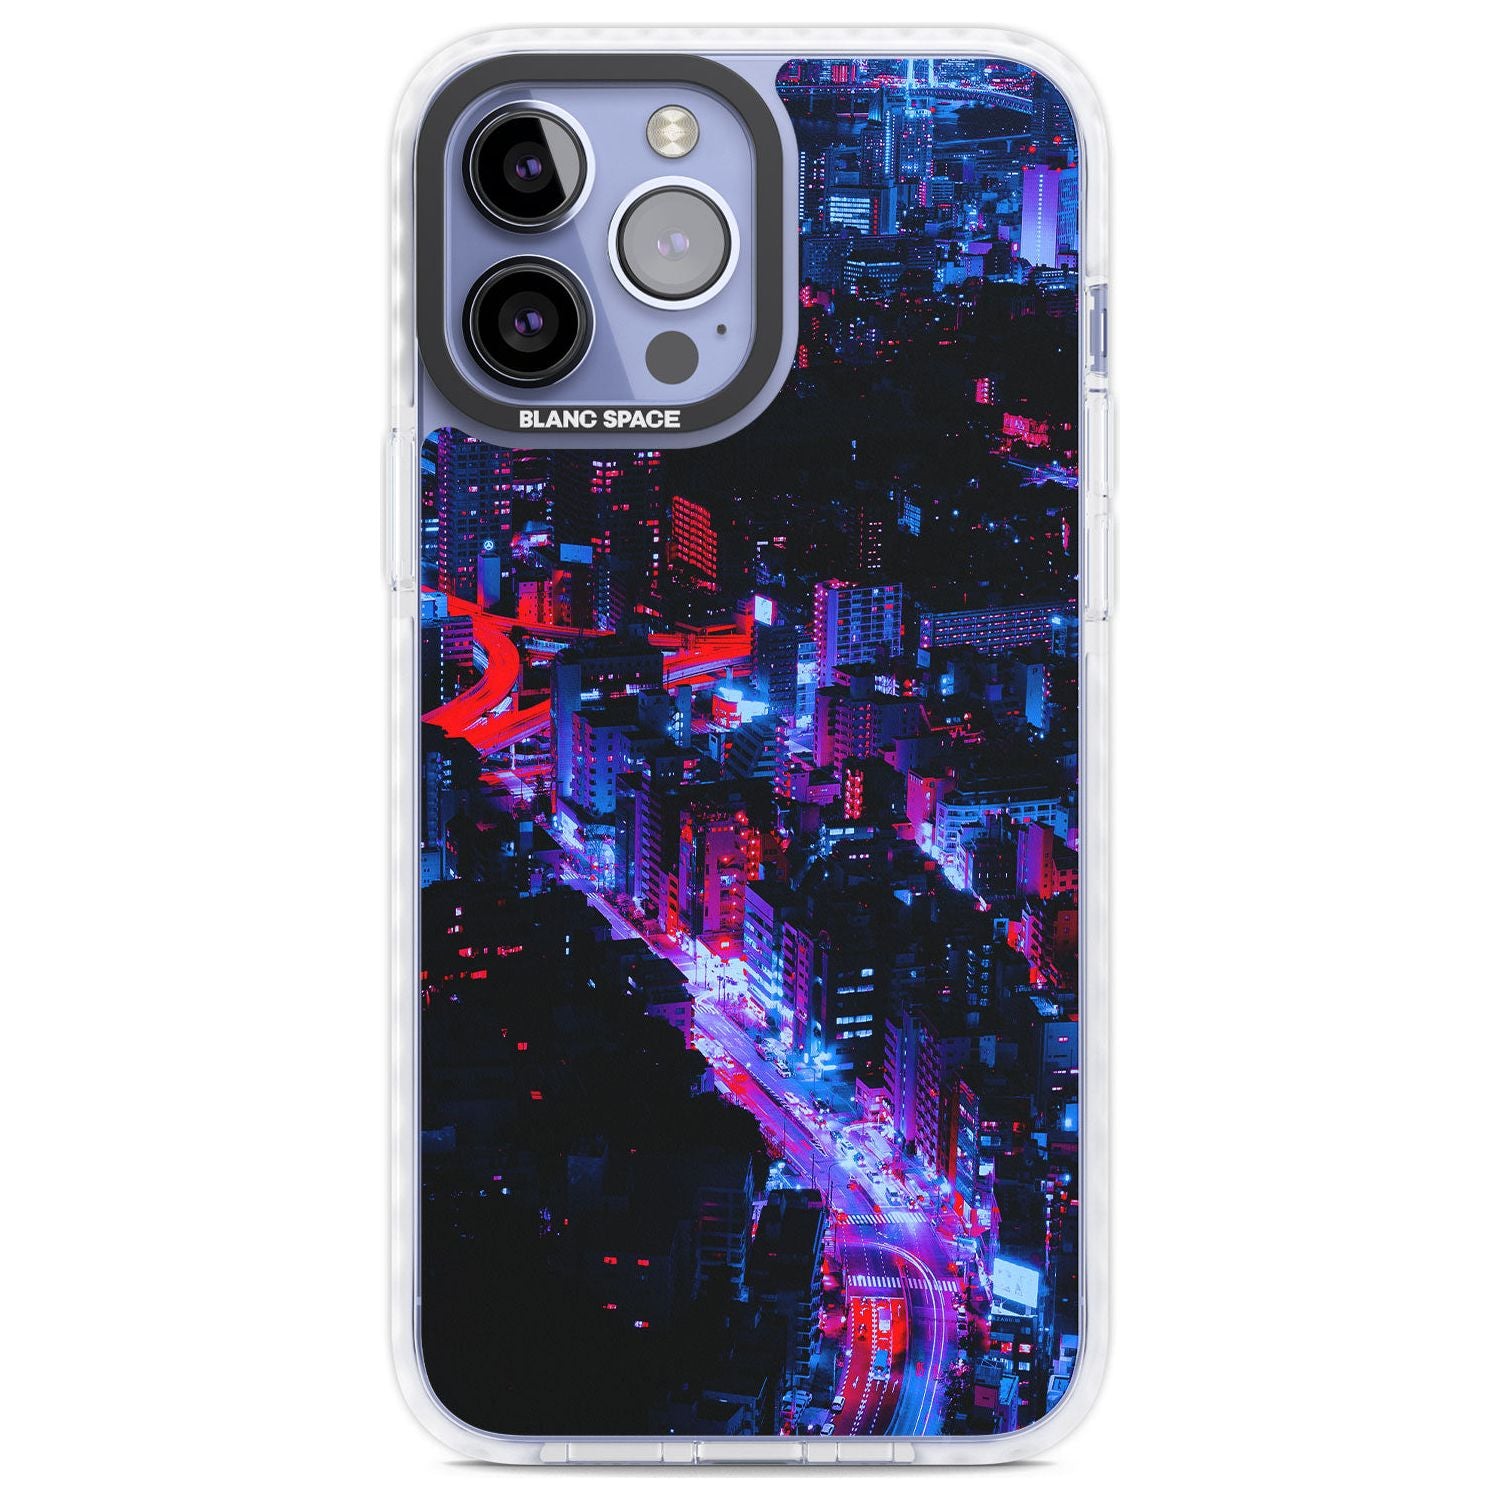 Arial City View - Neon Cities Photographs Phone Case iPhone 13 Pro Max / Impact Case,iPhone 14 Pro Max / Impact Case Blanc Space